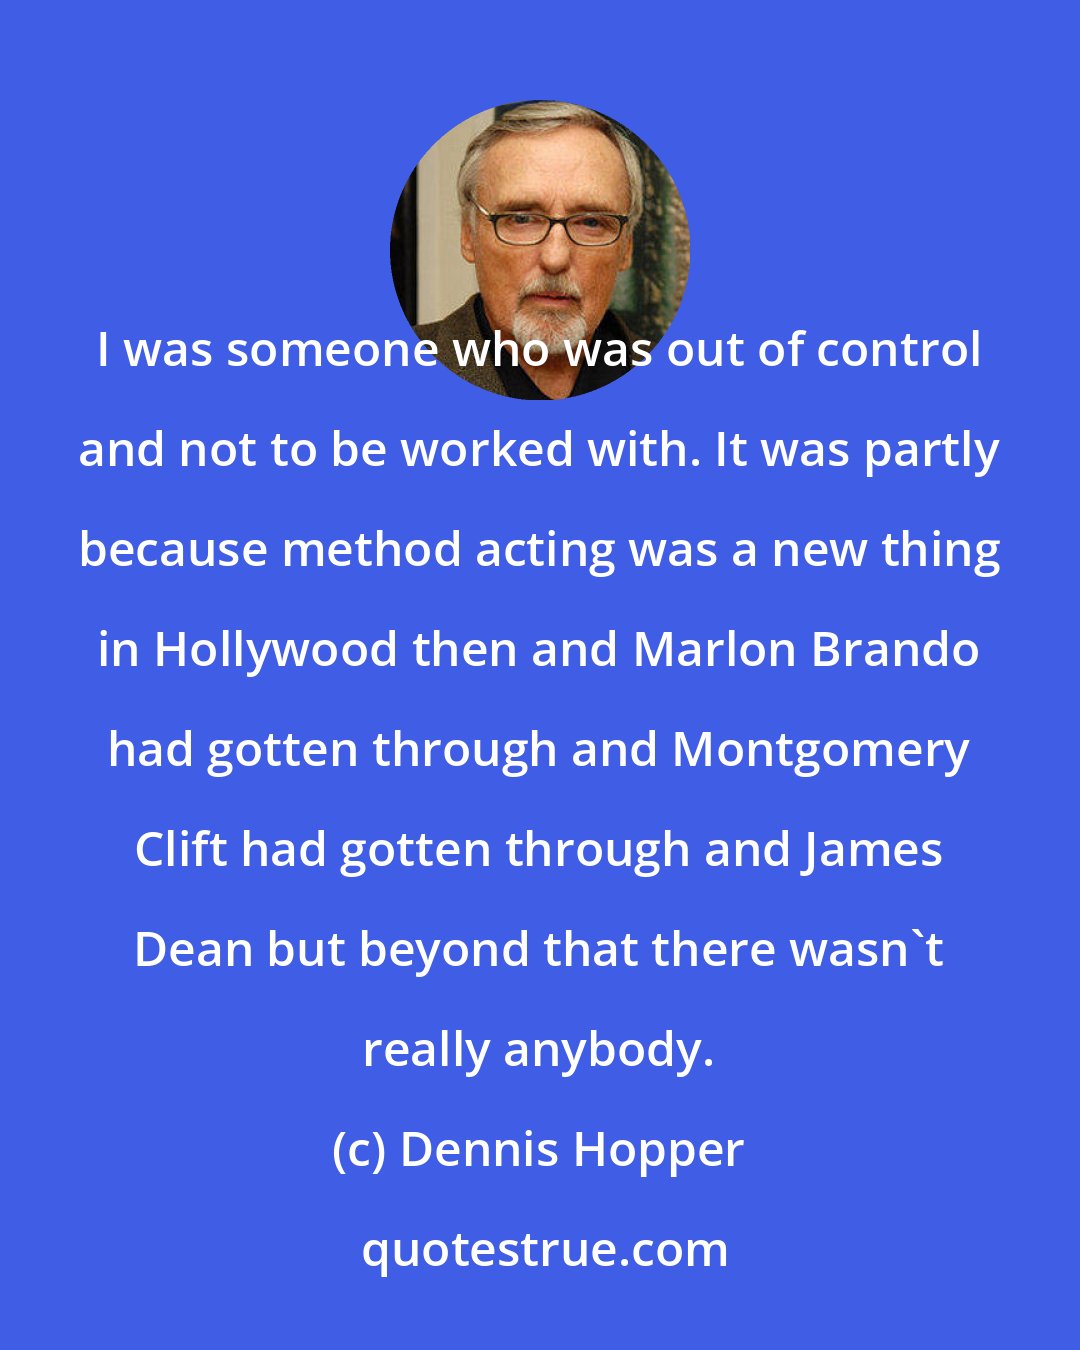 Dennis Hopper: I was someone who was out of control and not to be worked with. It was partly because method acting was a new thing in Hollywood then and Marlon Brando had gotten through and Montgomery Clift had gotten through and James Dean but beyond that there wasn't really anybody.